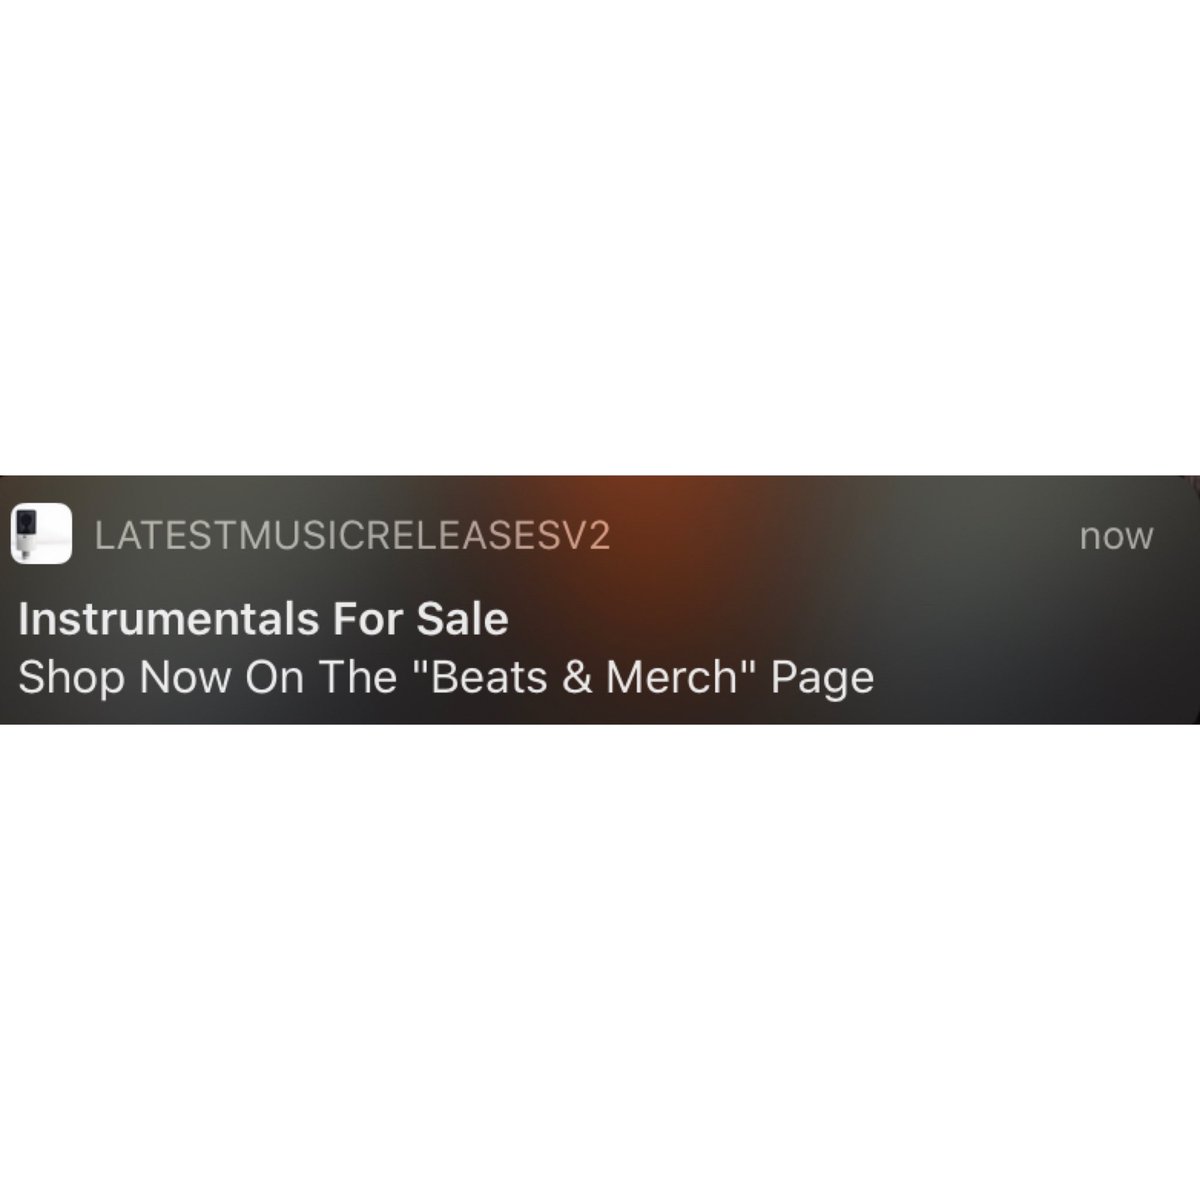 Lin in bio #instrumentalforsale #TuesdayThoughts #latestmusicreleases